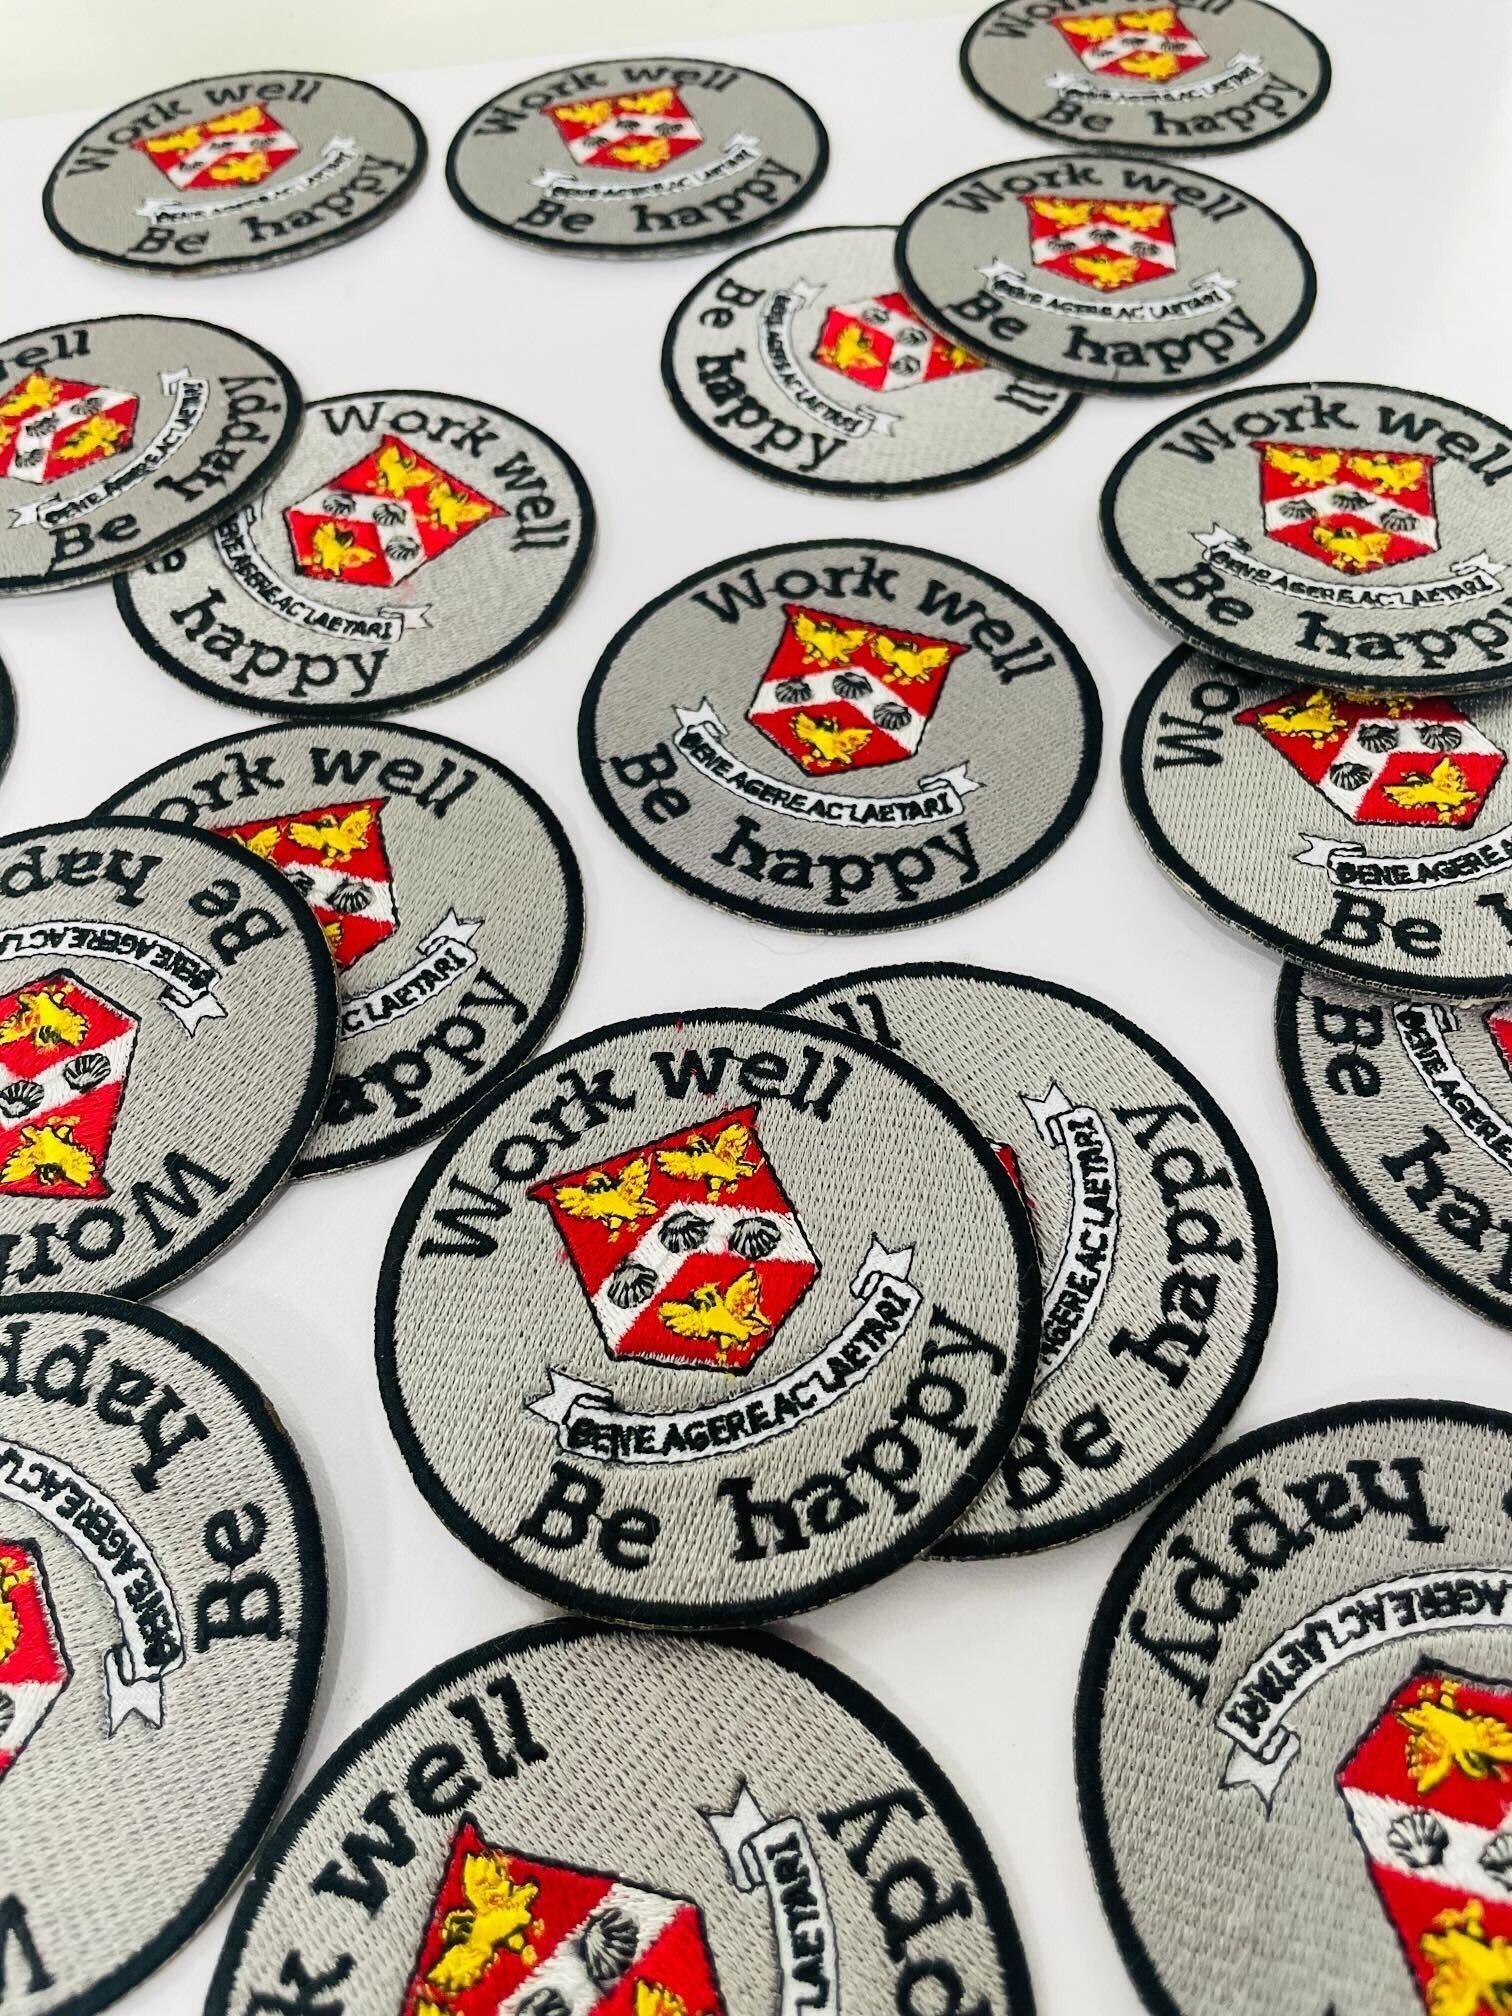 Embroidered Patches Canada  Toronto Based Exclusive Embroidered Patch